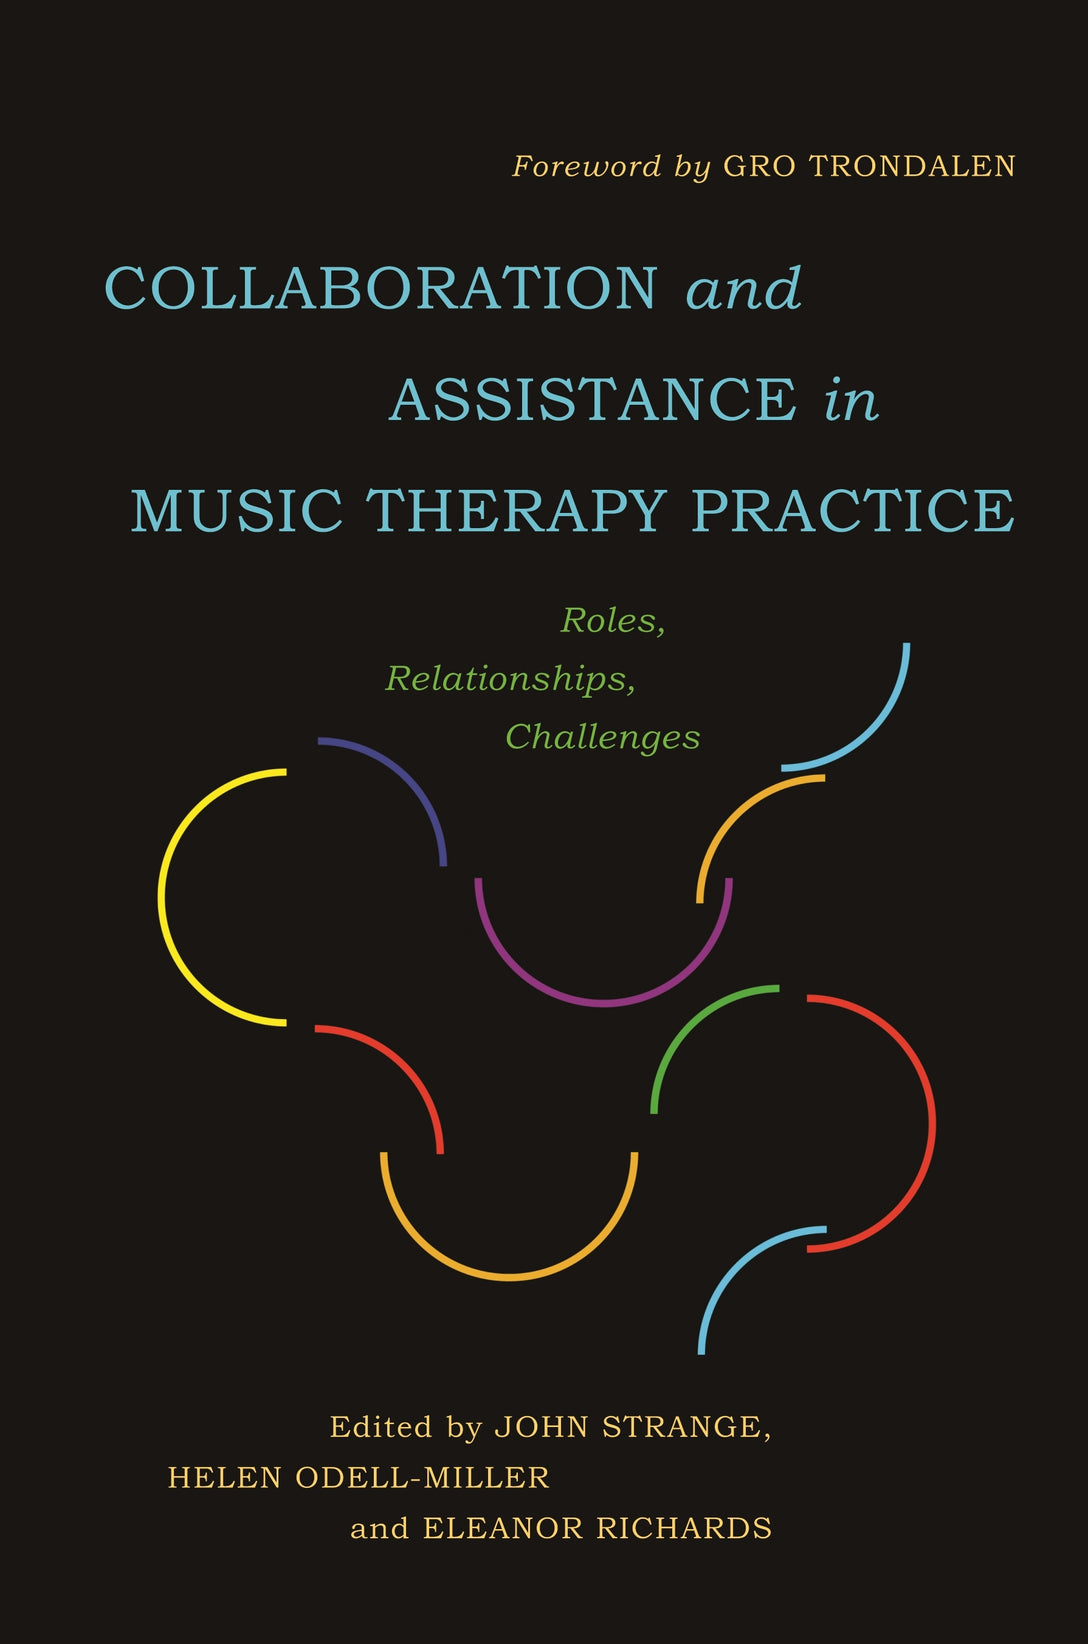 Collaboration and Assistance in Music Therapy Practice by Helen Odell-Miller, Eleanor Richards, Gro Trondalen, John Strange, No Author Listed